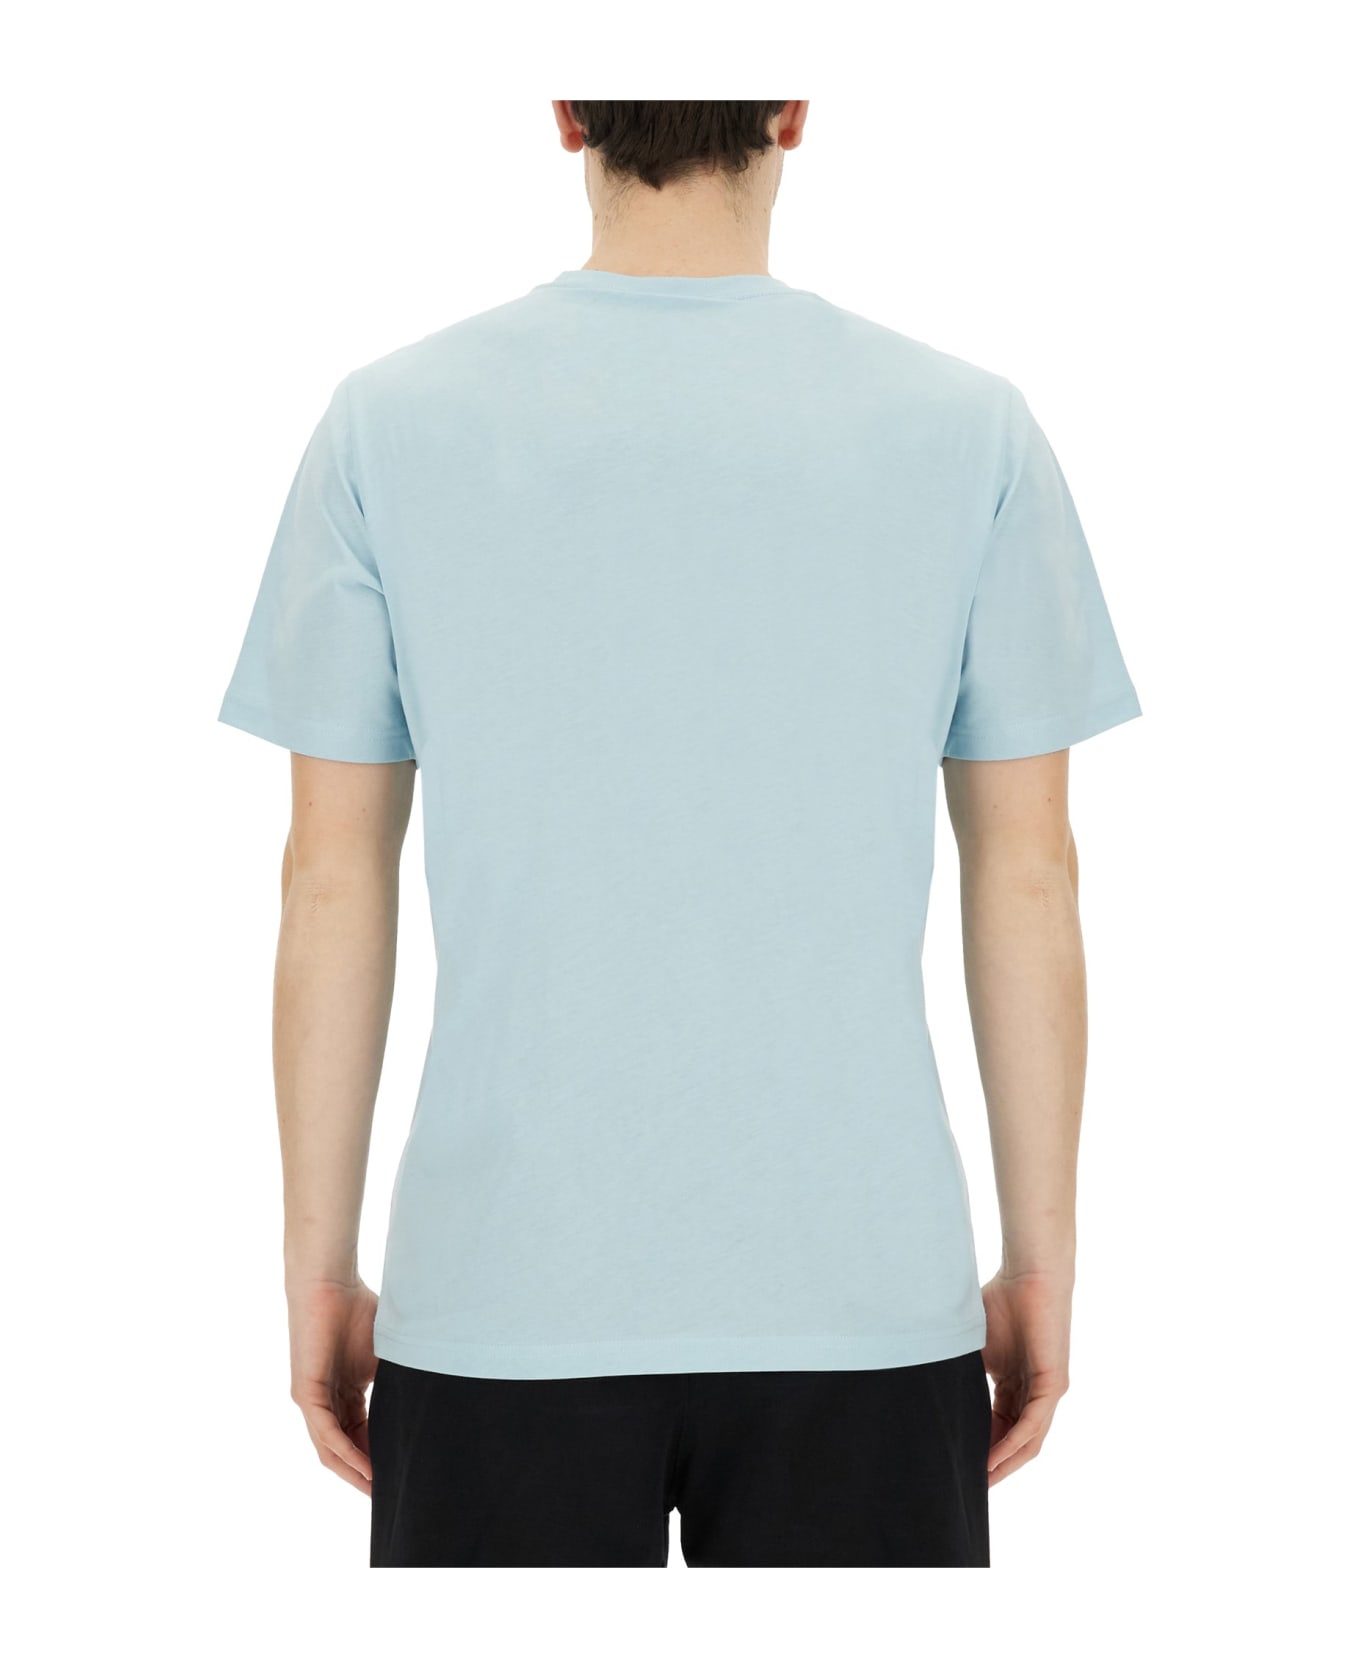 PS by Paul Smith Zebra T-shirt - Clear Blue